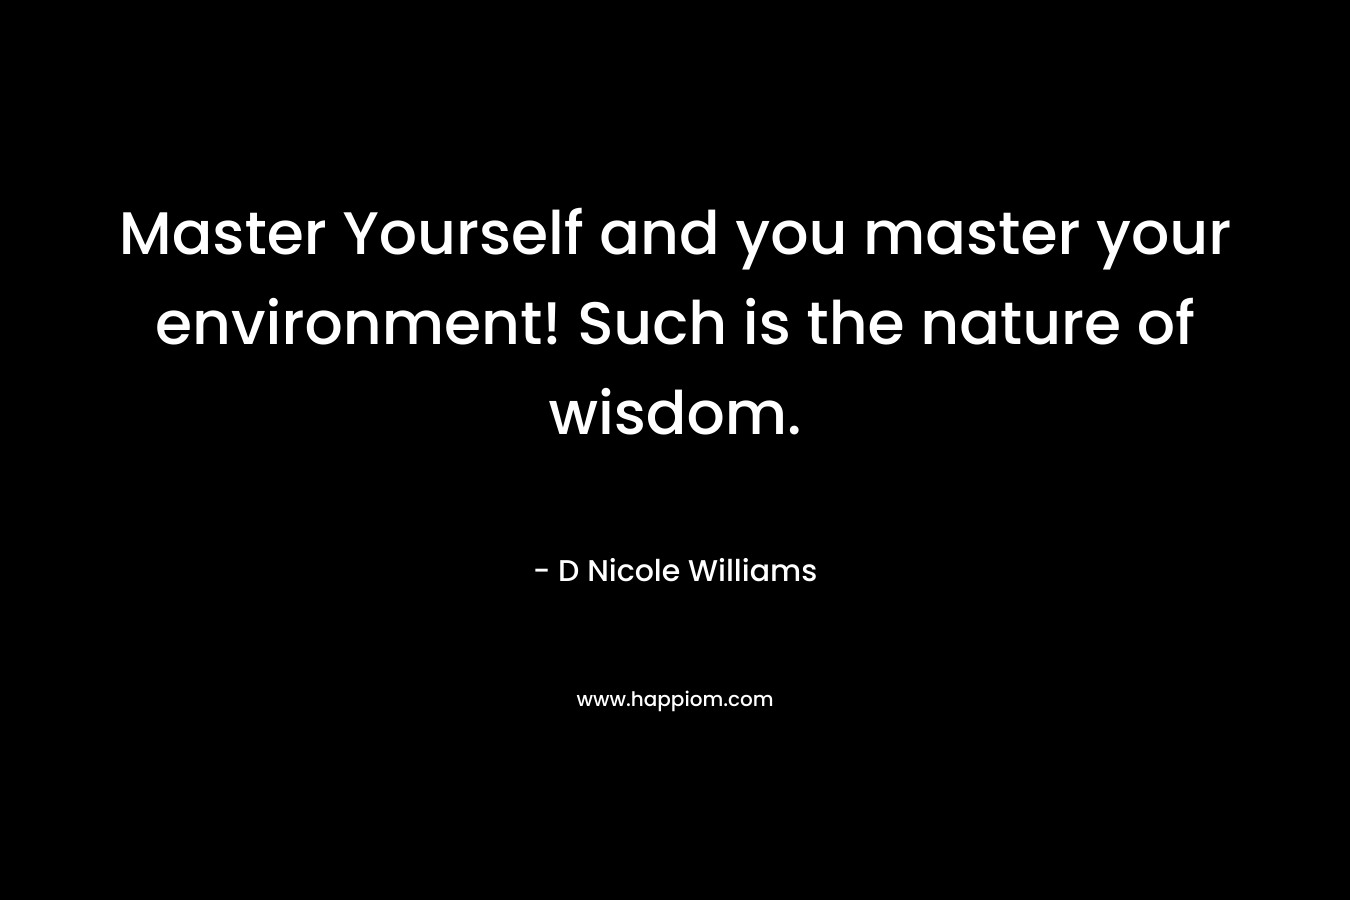 Master Yourself and you master your environment! Such is the nature of wisdom.